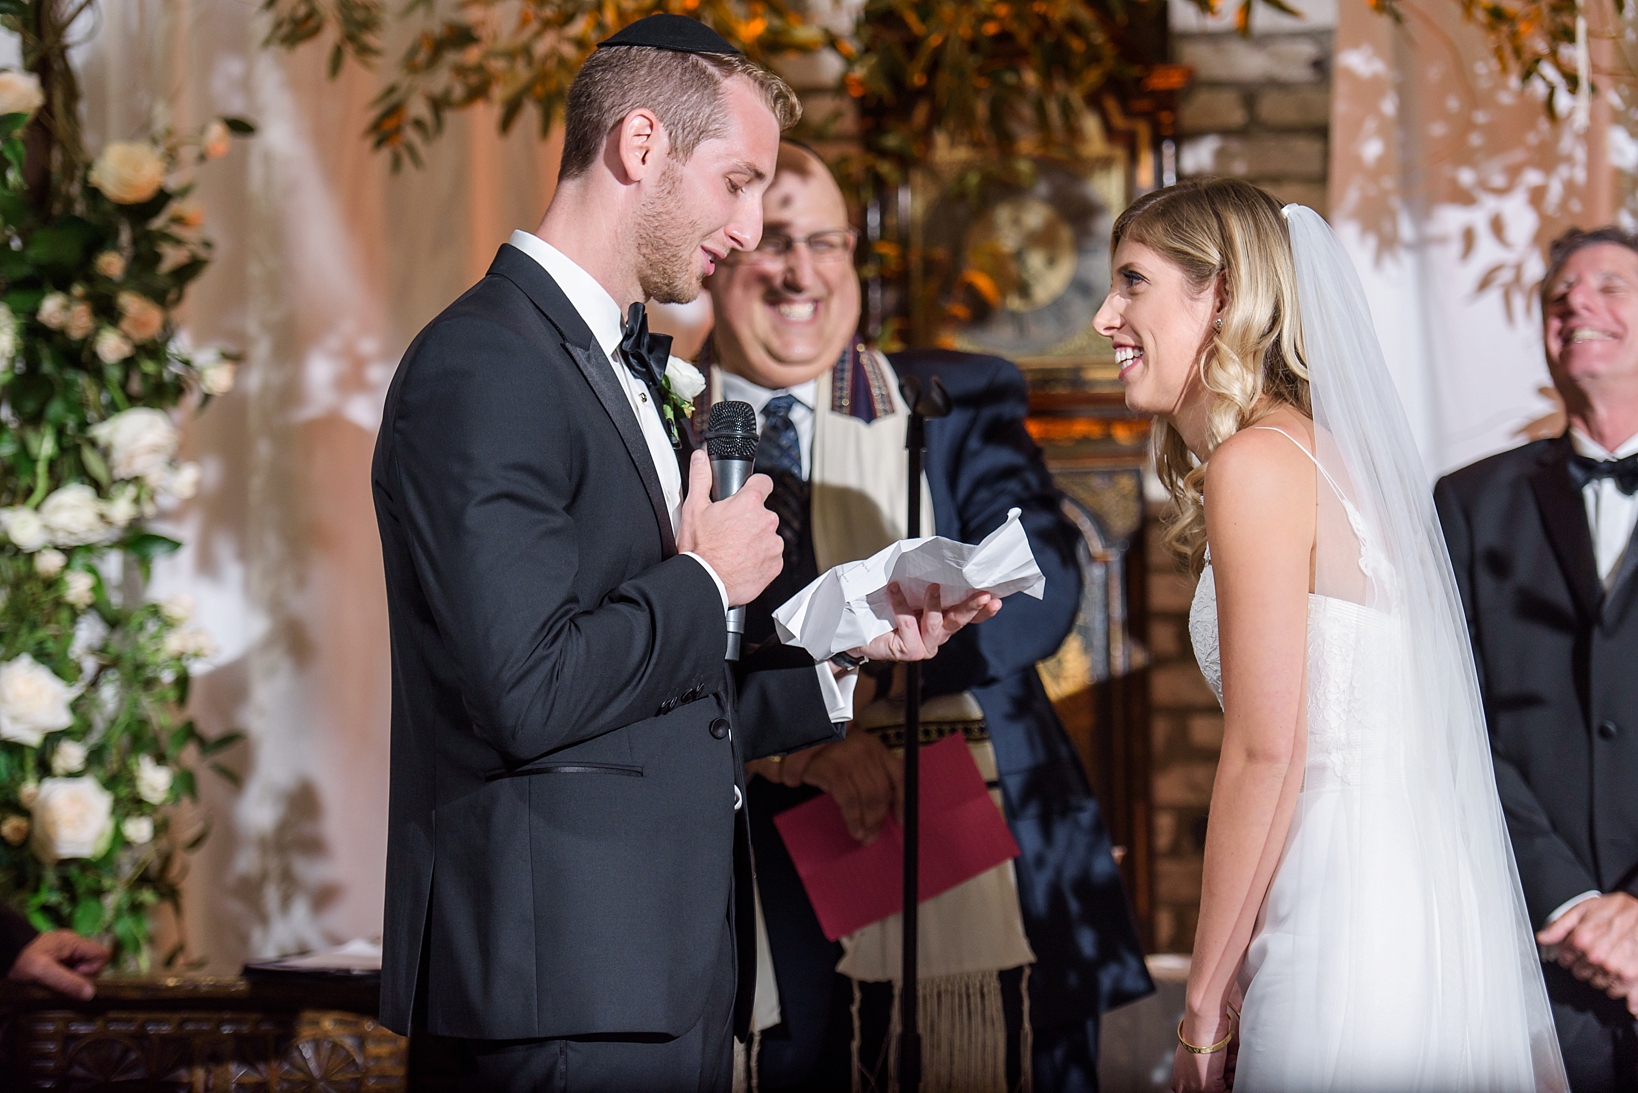 The Groom reads his vows to his smiling Bride